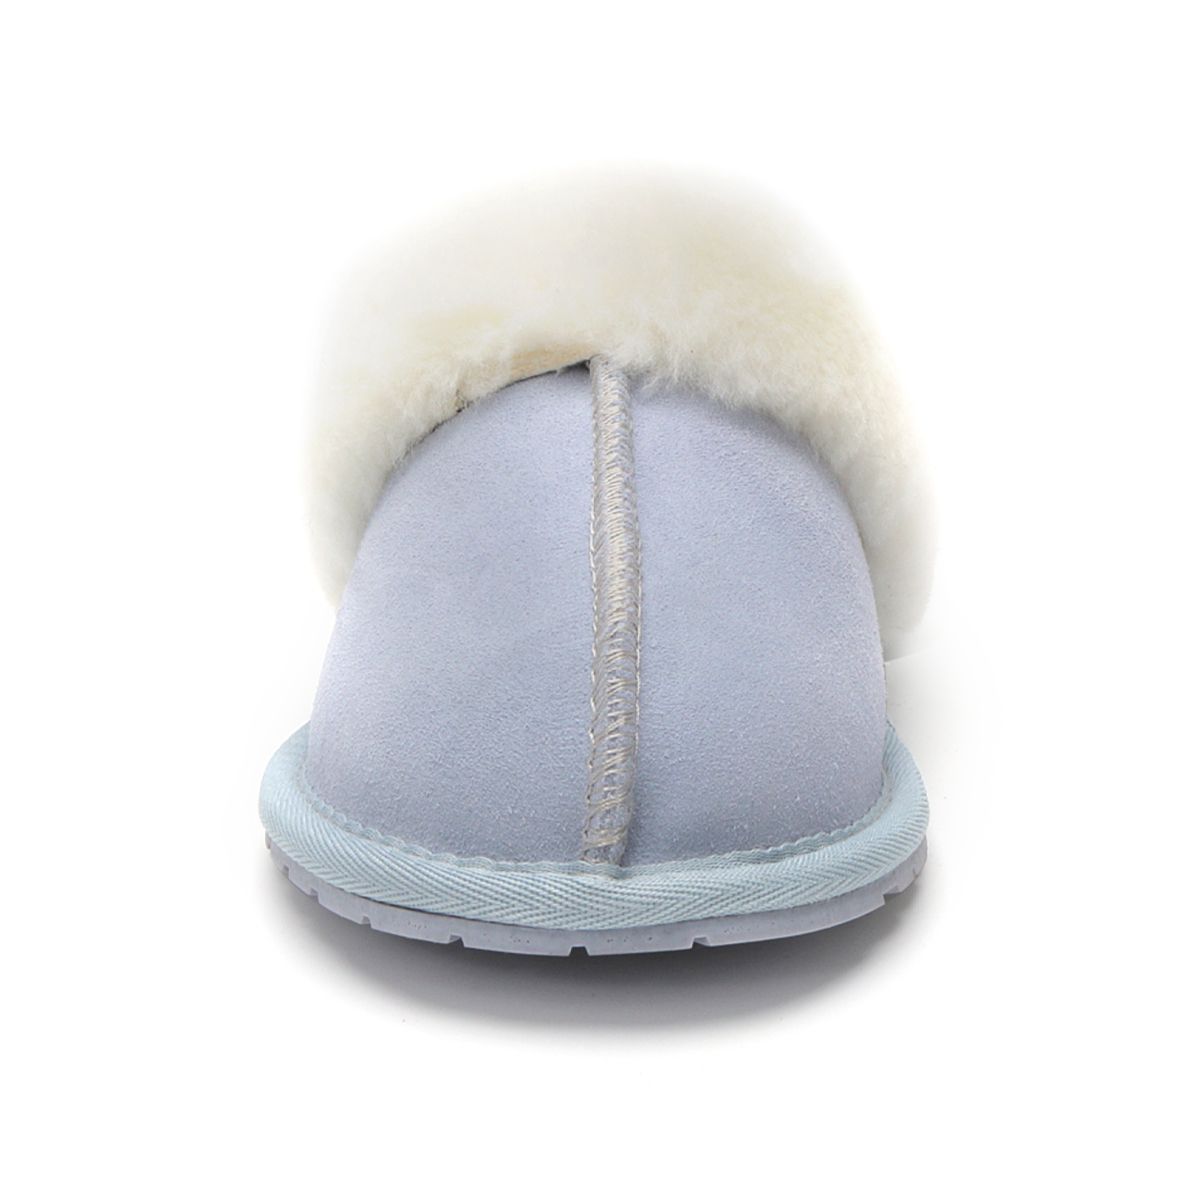 DETAILS





Extremely comfortable slip-on slipper

Soft premium genuine Australian Sheepskin wool lining
Full premium leather Suede upper with Australian sheepskin insole
Sustainably sourced and eco-friendly processed
Unisex sheepskin slipper – the perfect home accessory 
Soft Rubber outsole – highly durable and lightweight
Firm wool pelt for superior warmth
100% brand new and high quality, comes in a branded box, suitable for gifting